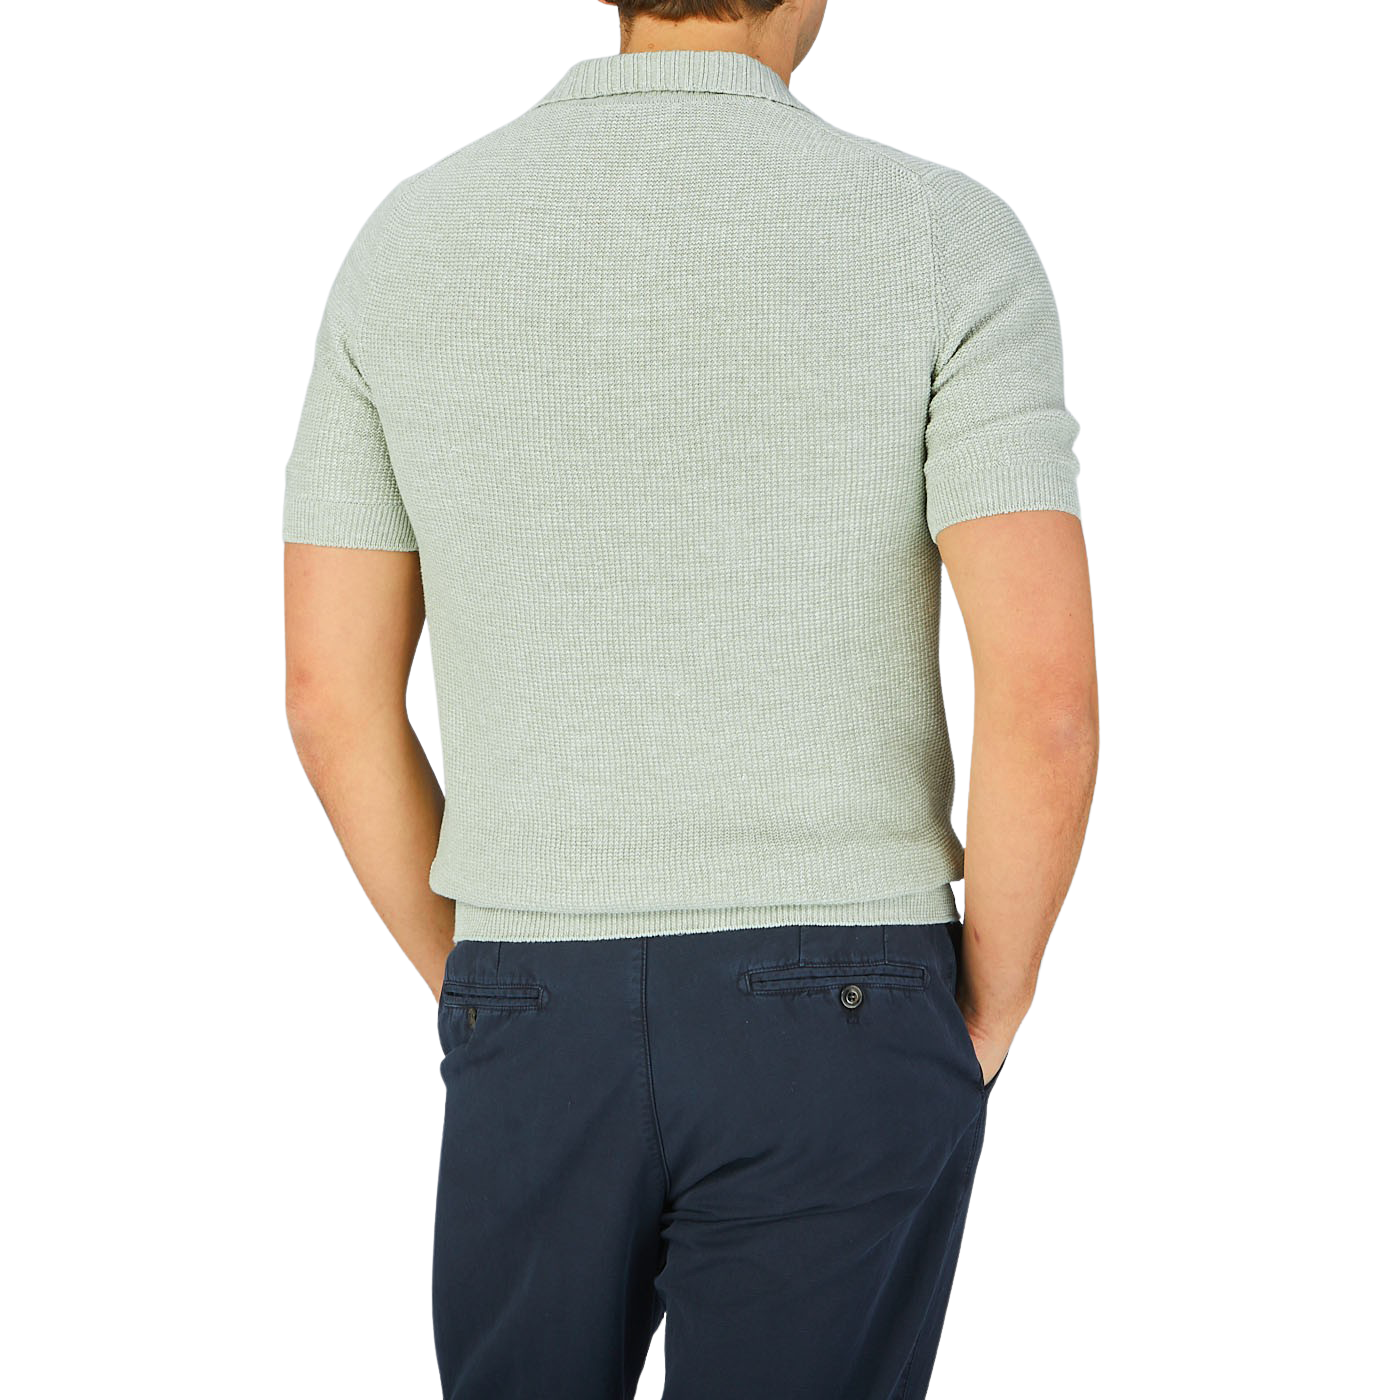 The back view of a man wearing a Gran Sasso light green cotton linen polo shirt and navy pants.